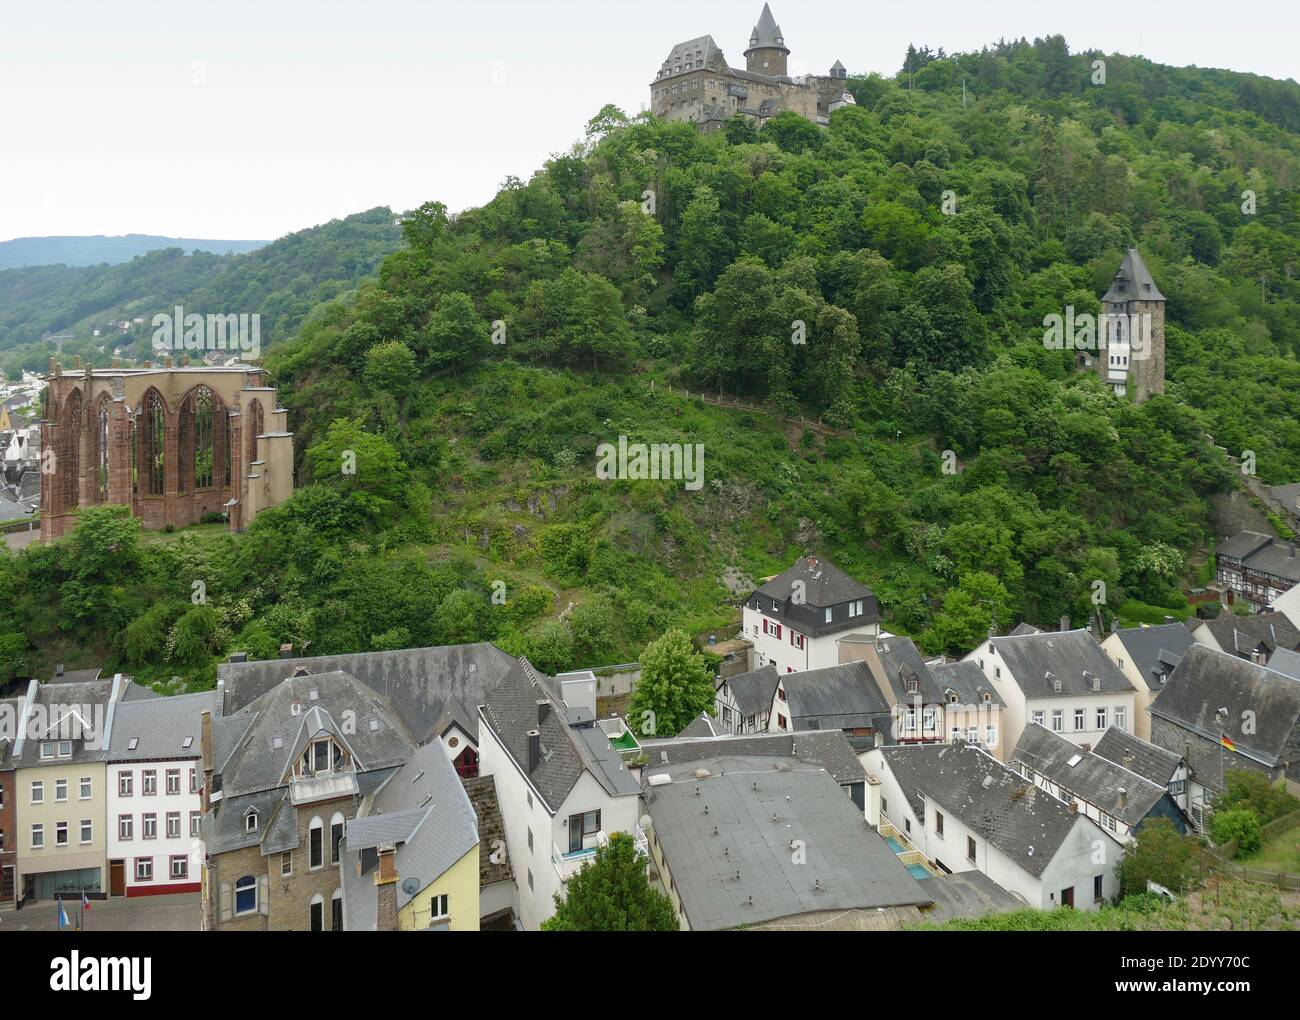 aerial view of Bacharach, a town in the Mainz-Bingen district in Rhineland-Palatinate, Germany Stock Photo